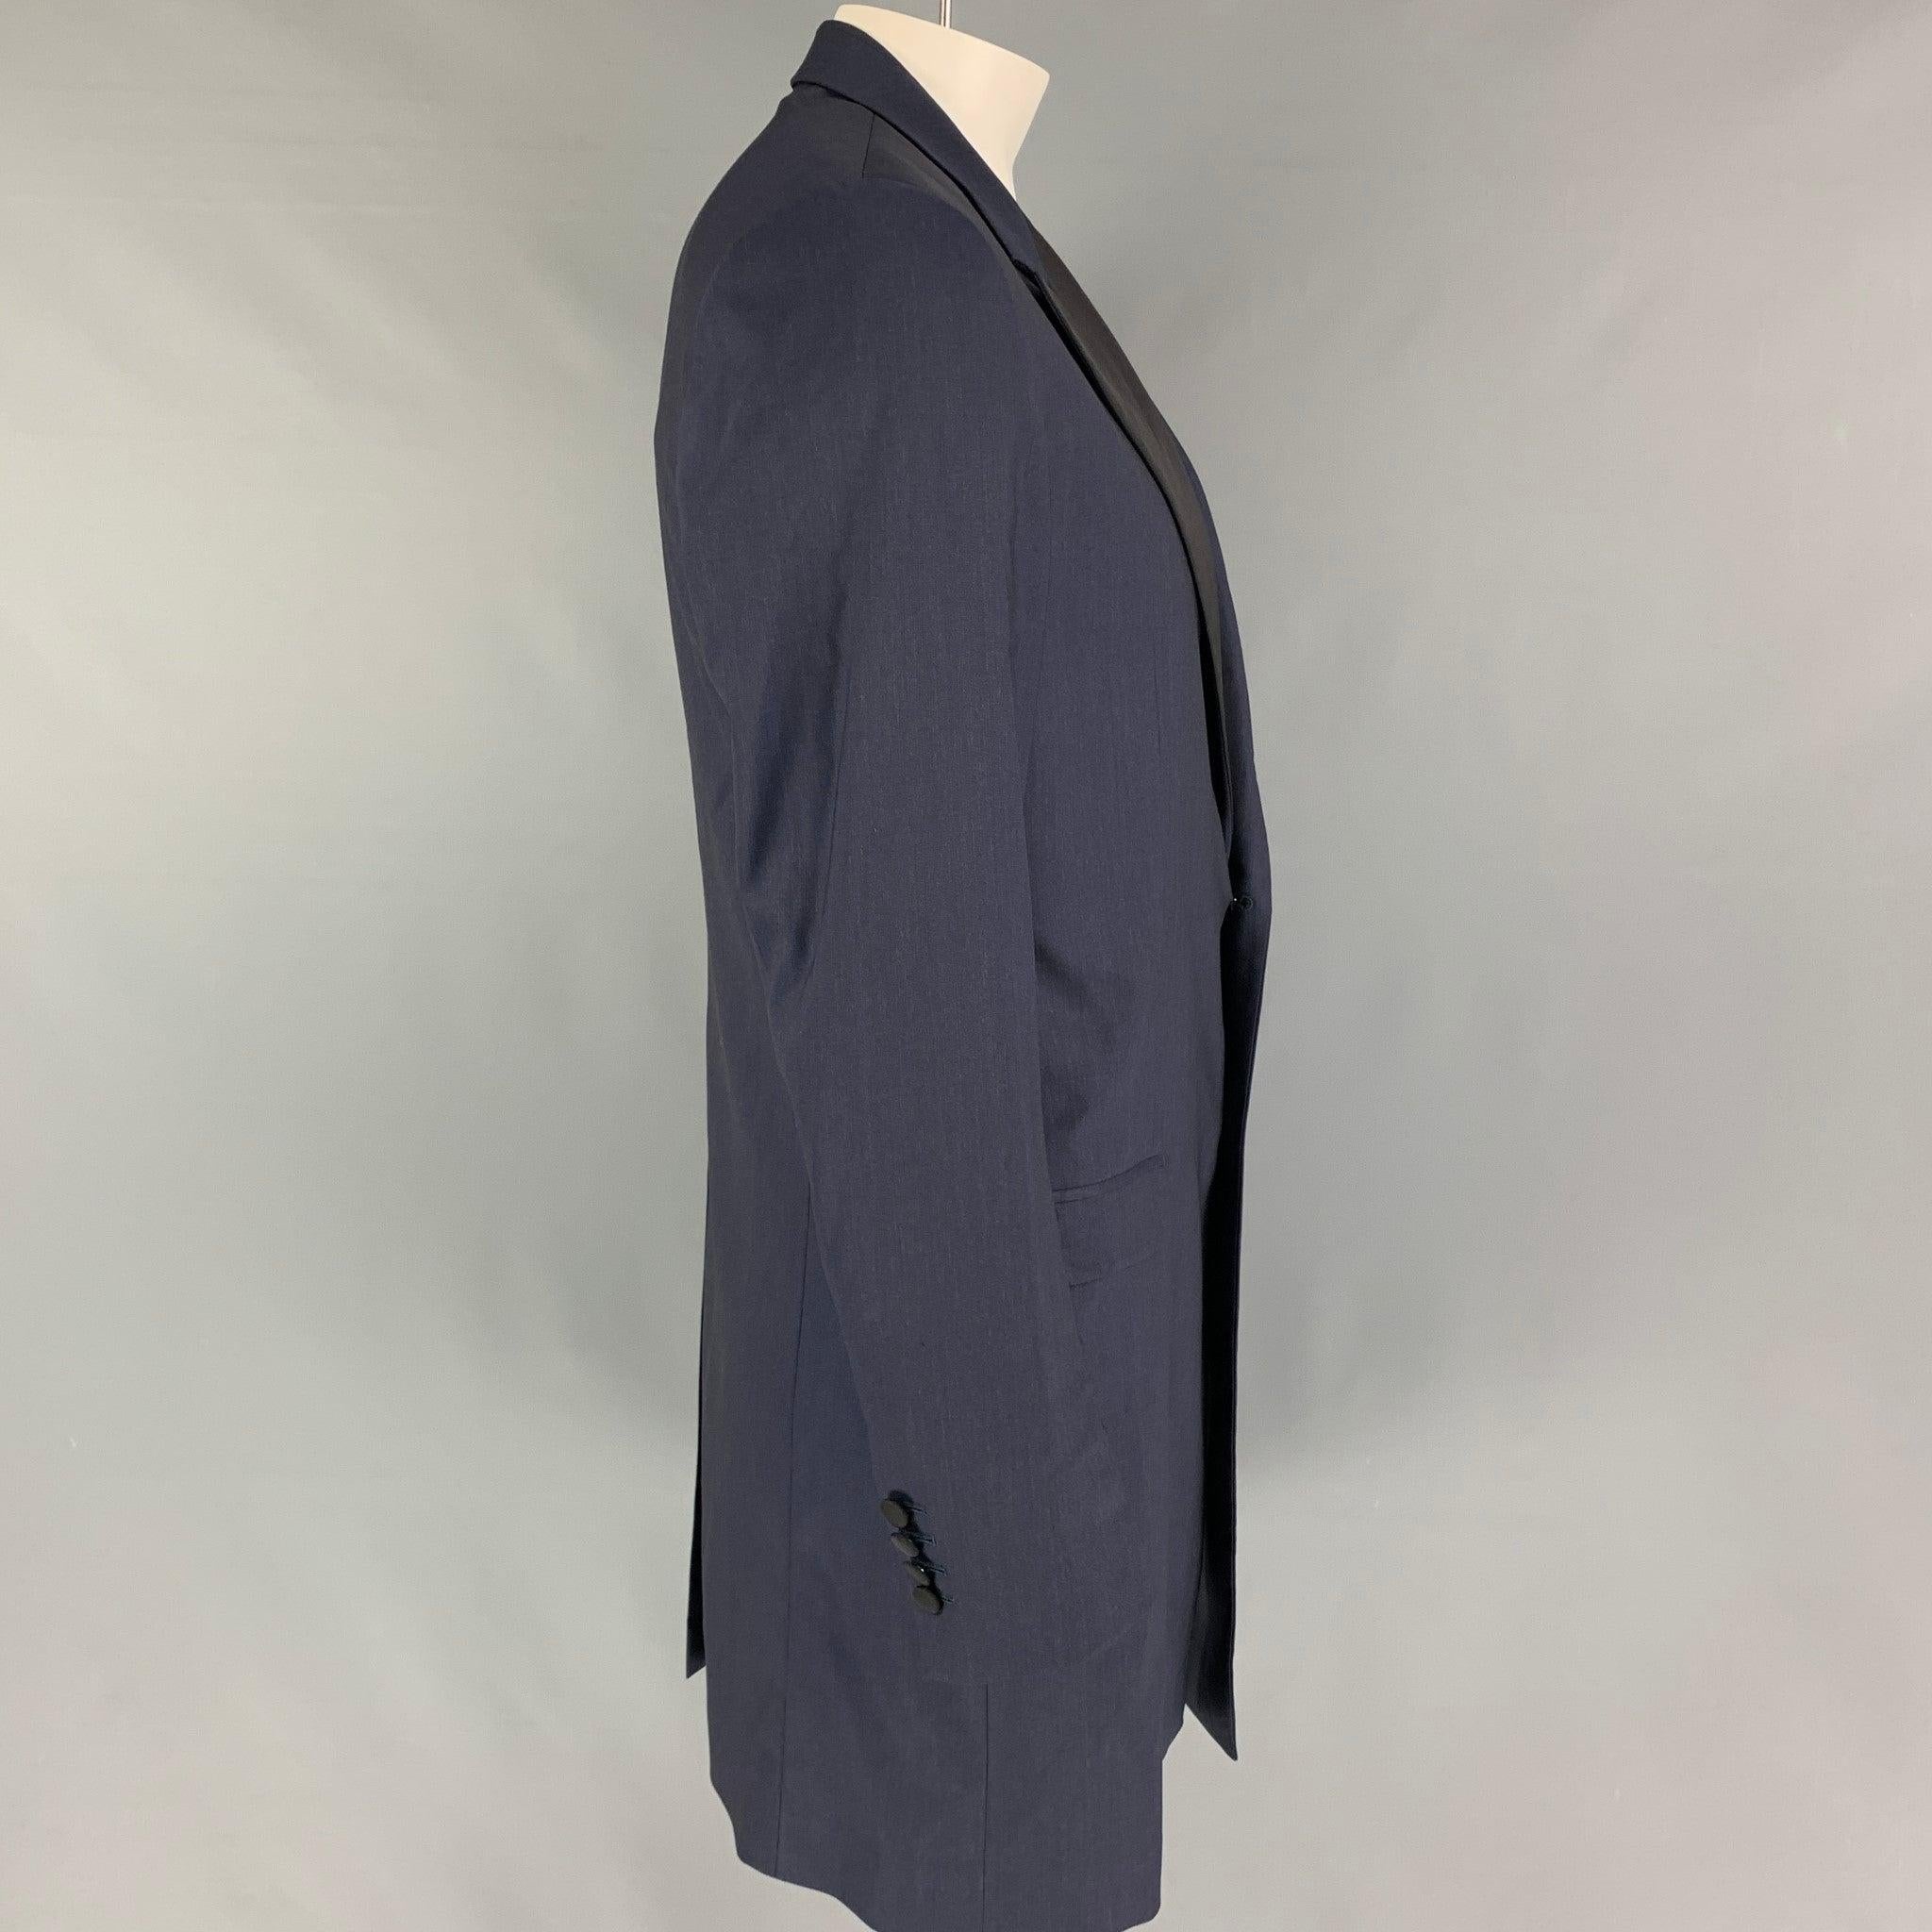 DOLCE & GABBANA coat comes in a navy & black wool with a full liner featuring a peak lapel, flap pockets, single back vent, and a double button closure. Made in Italy.Very Good
Pre-Owned Condition. 

Marked:  52 

Measurements: 
 
Shoulder: 18